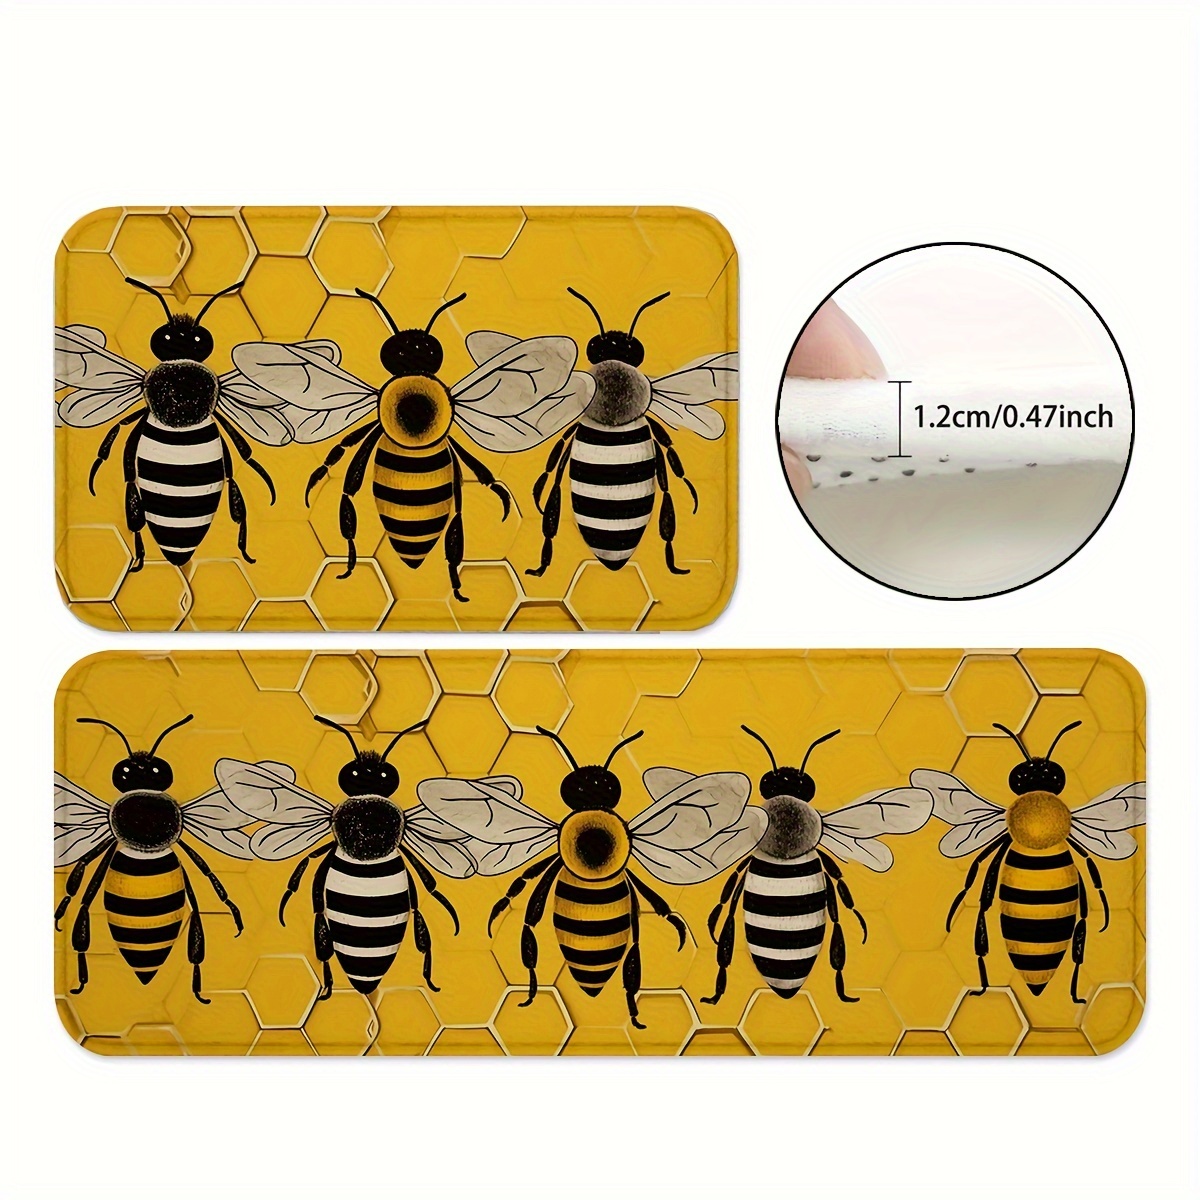 

1/2pcs, Bee Kitchen Mats, Non-slip And Durable Bathroom Pads, Comfortable Standing Runner Rugs, Carpets For Kitchen, Home, Office, Sink, Laundry Room, Bathroom, Spring Decor